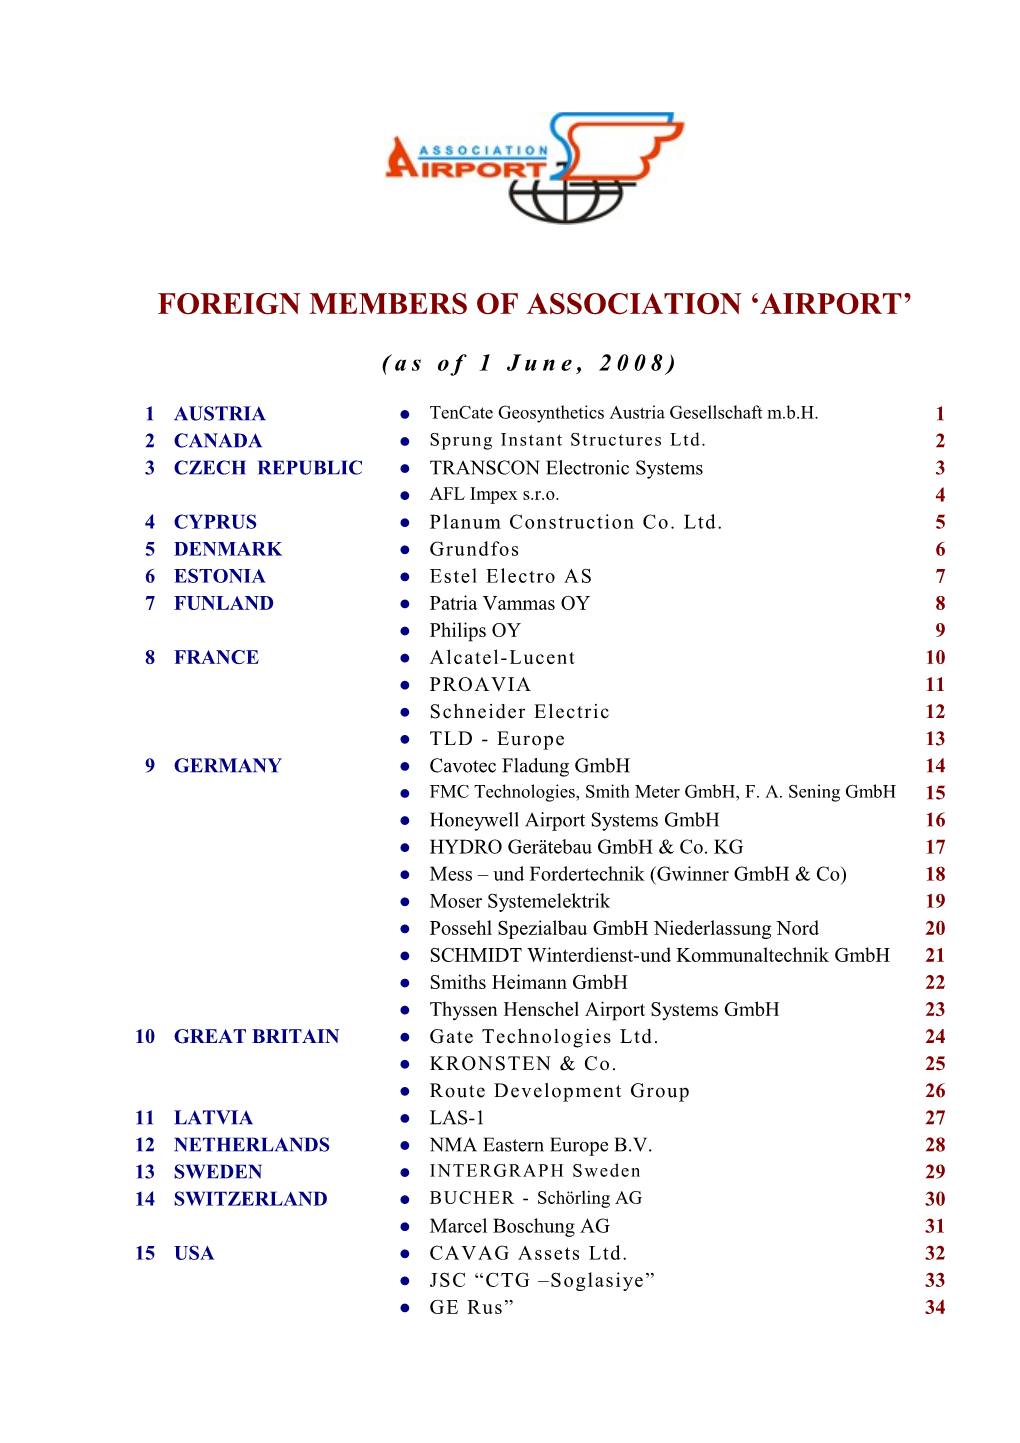 Foreign Members of Association Airport